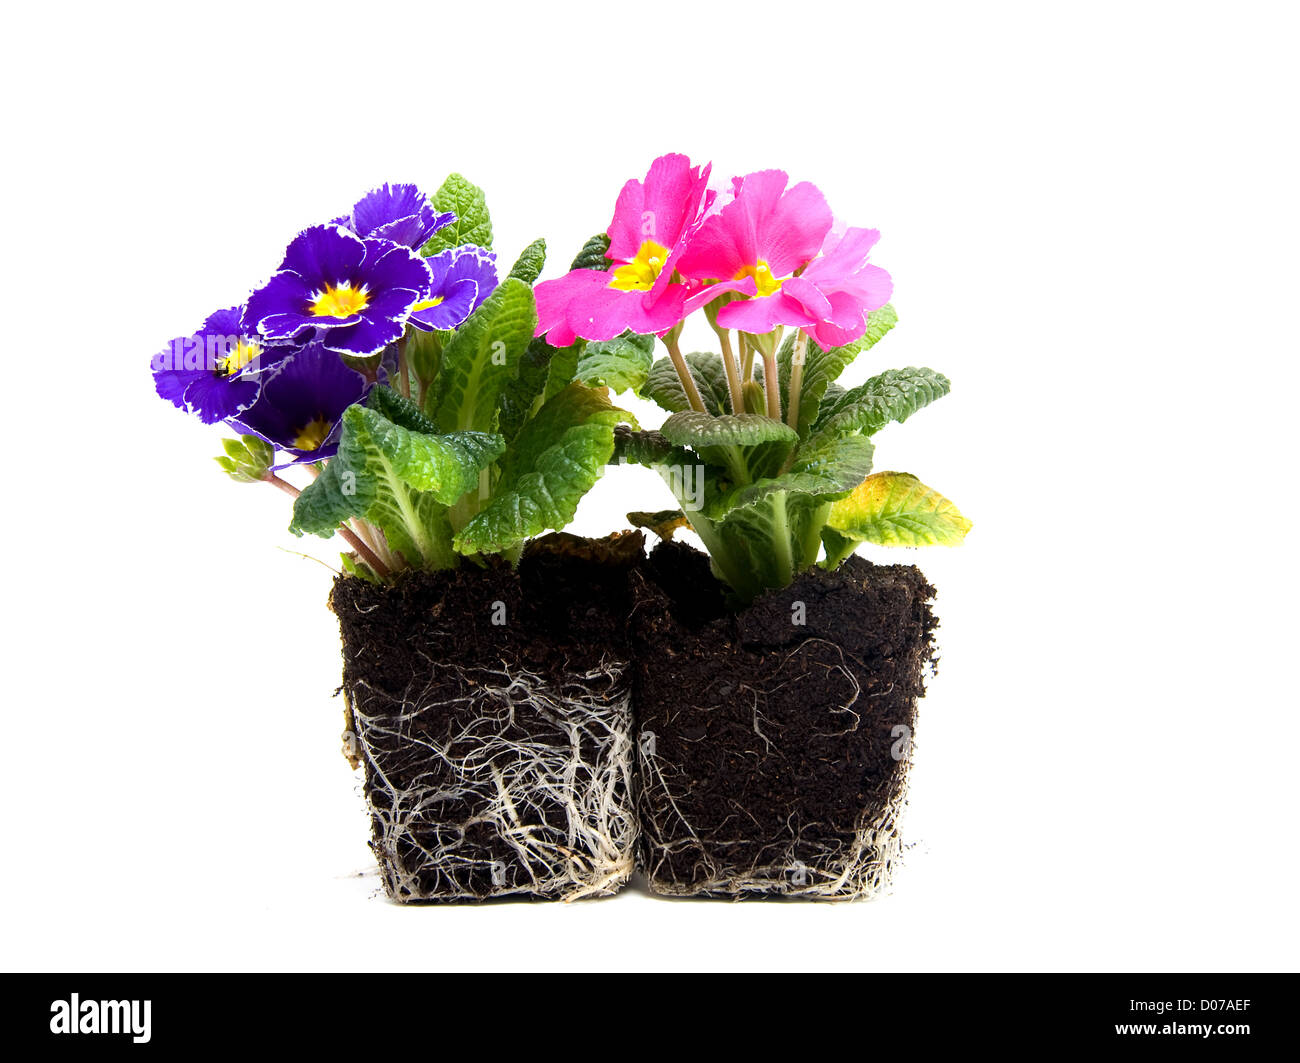 Pink and purple primula flower in garden soil over white background Stock Photo